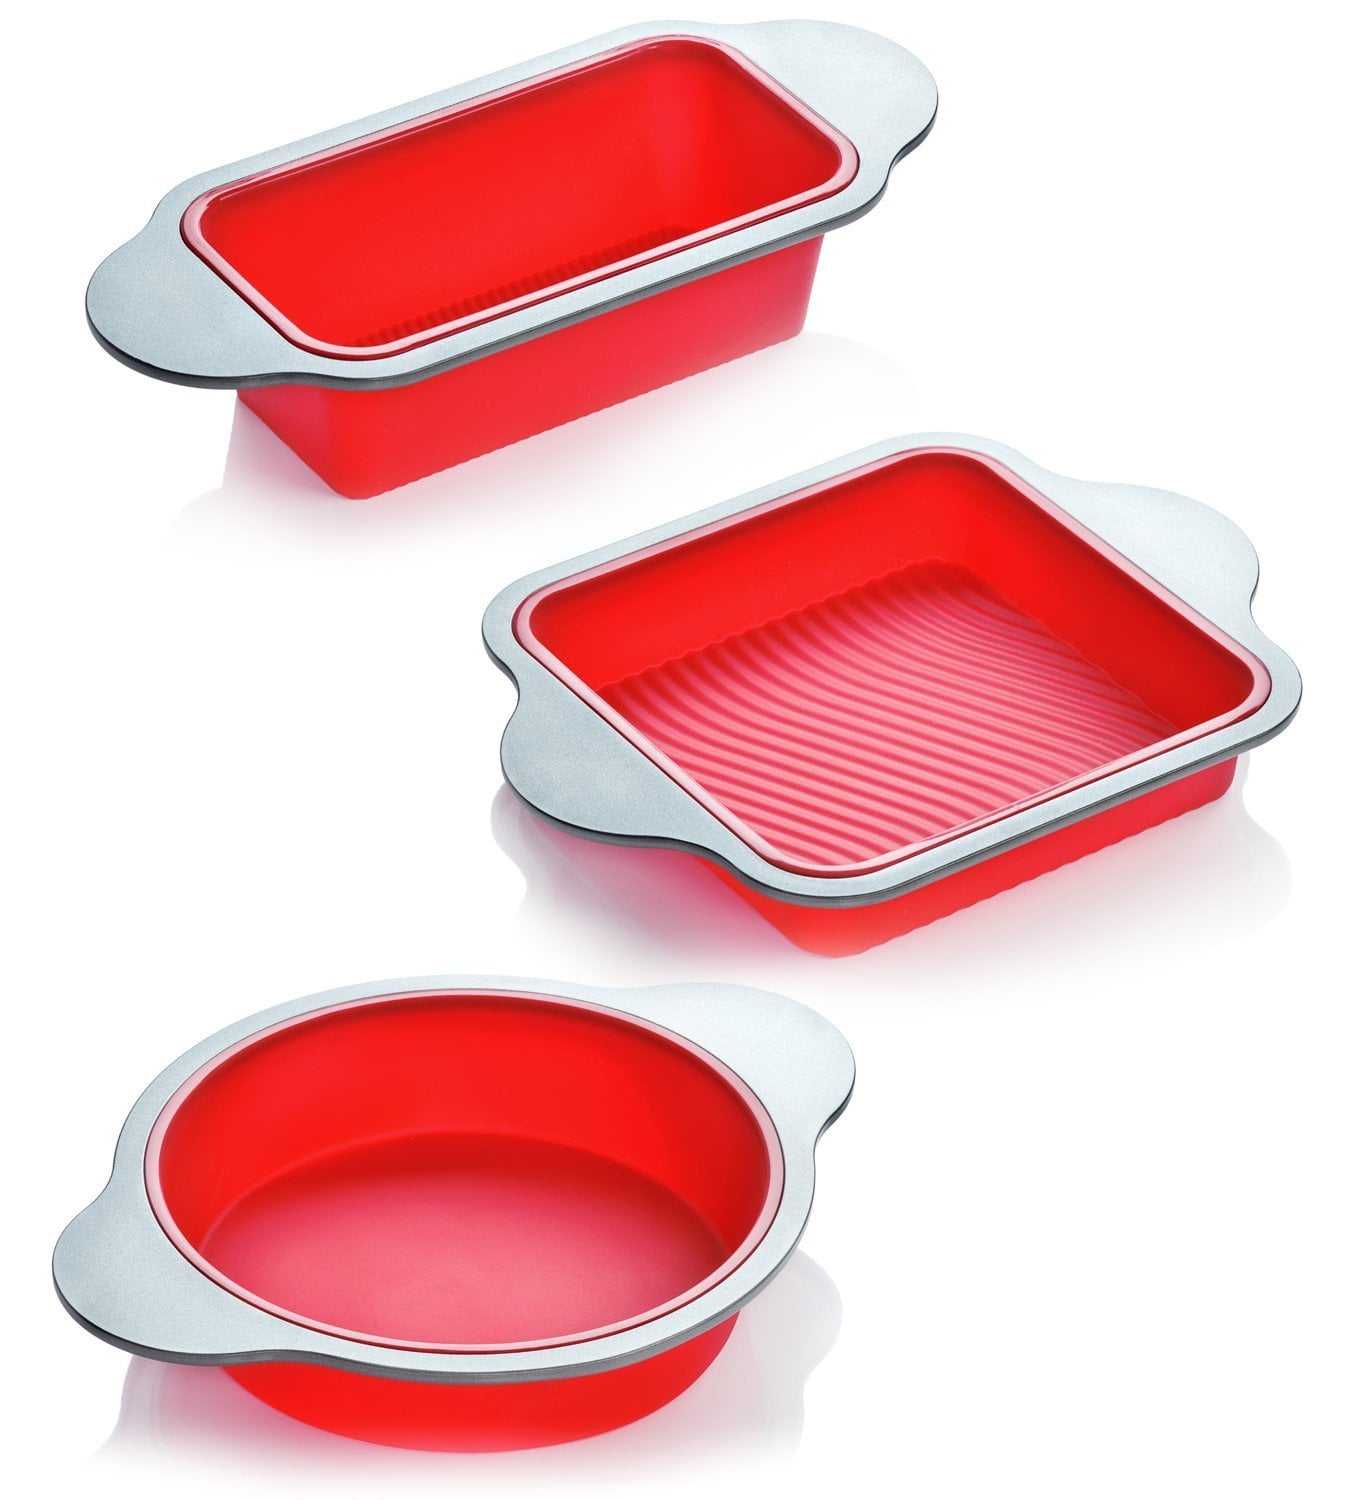 Professional Non-Stick Silicone Bakeware Set - 3 Oven Safe Pans